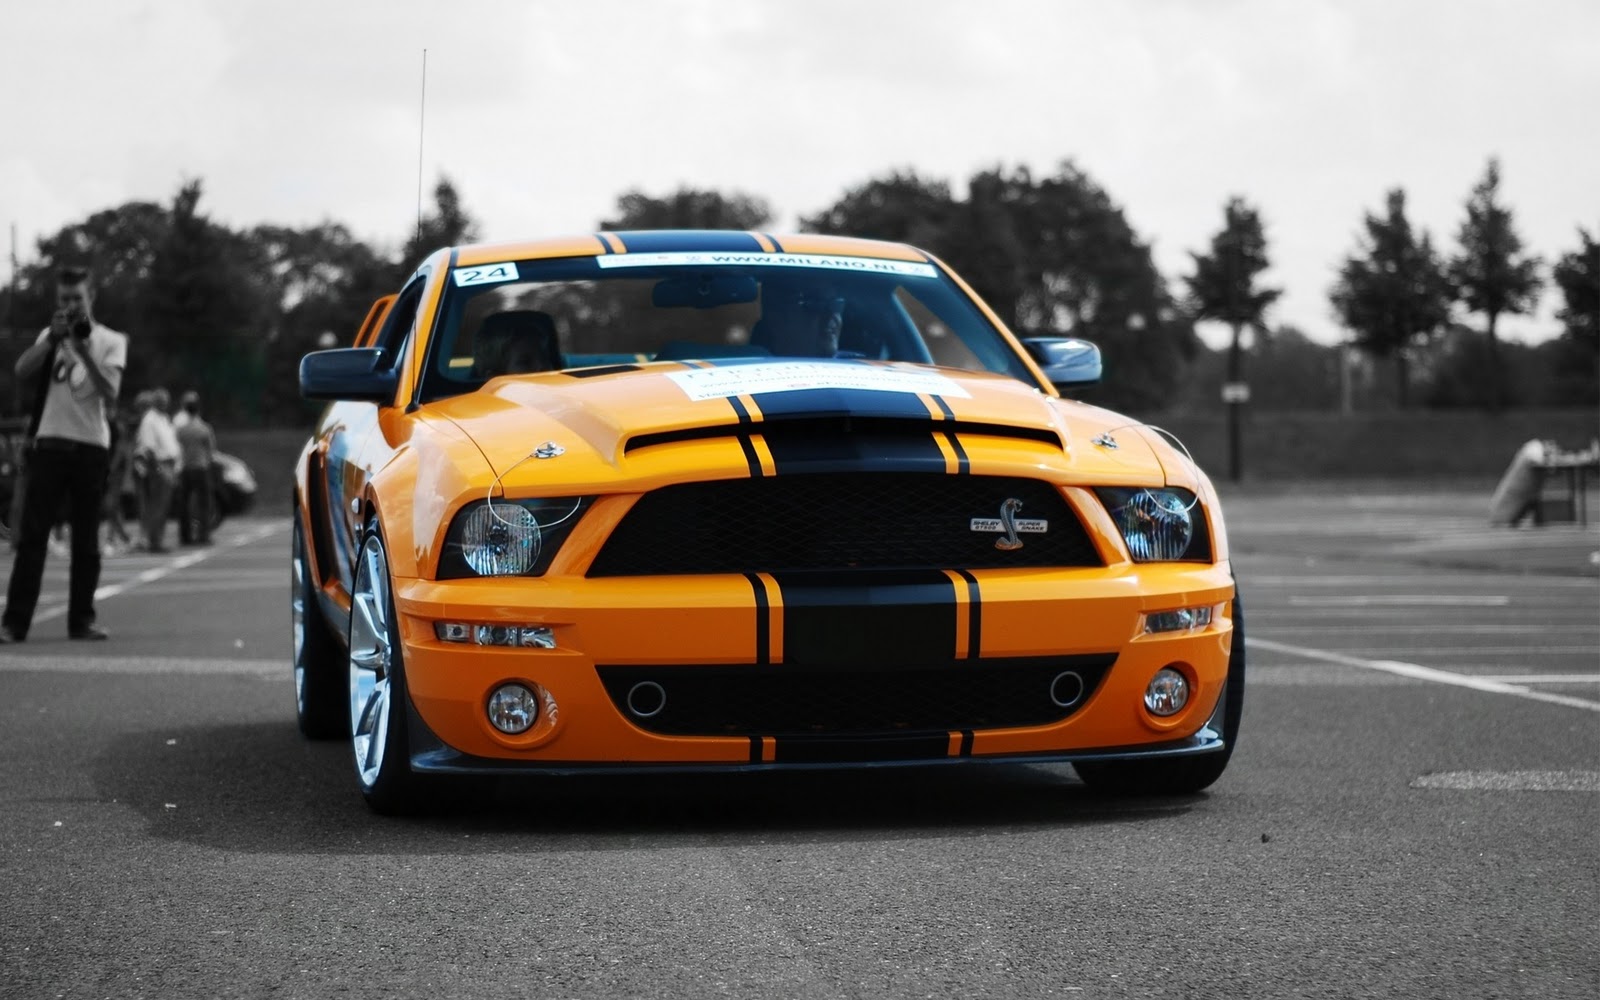 epic car wallpapers,land vehicle,vehicle,car,shelby mustang,yellow